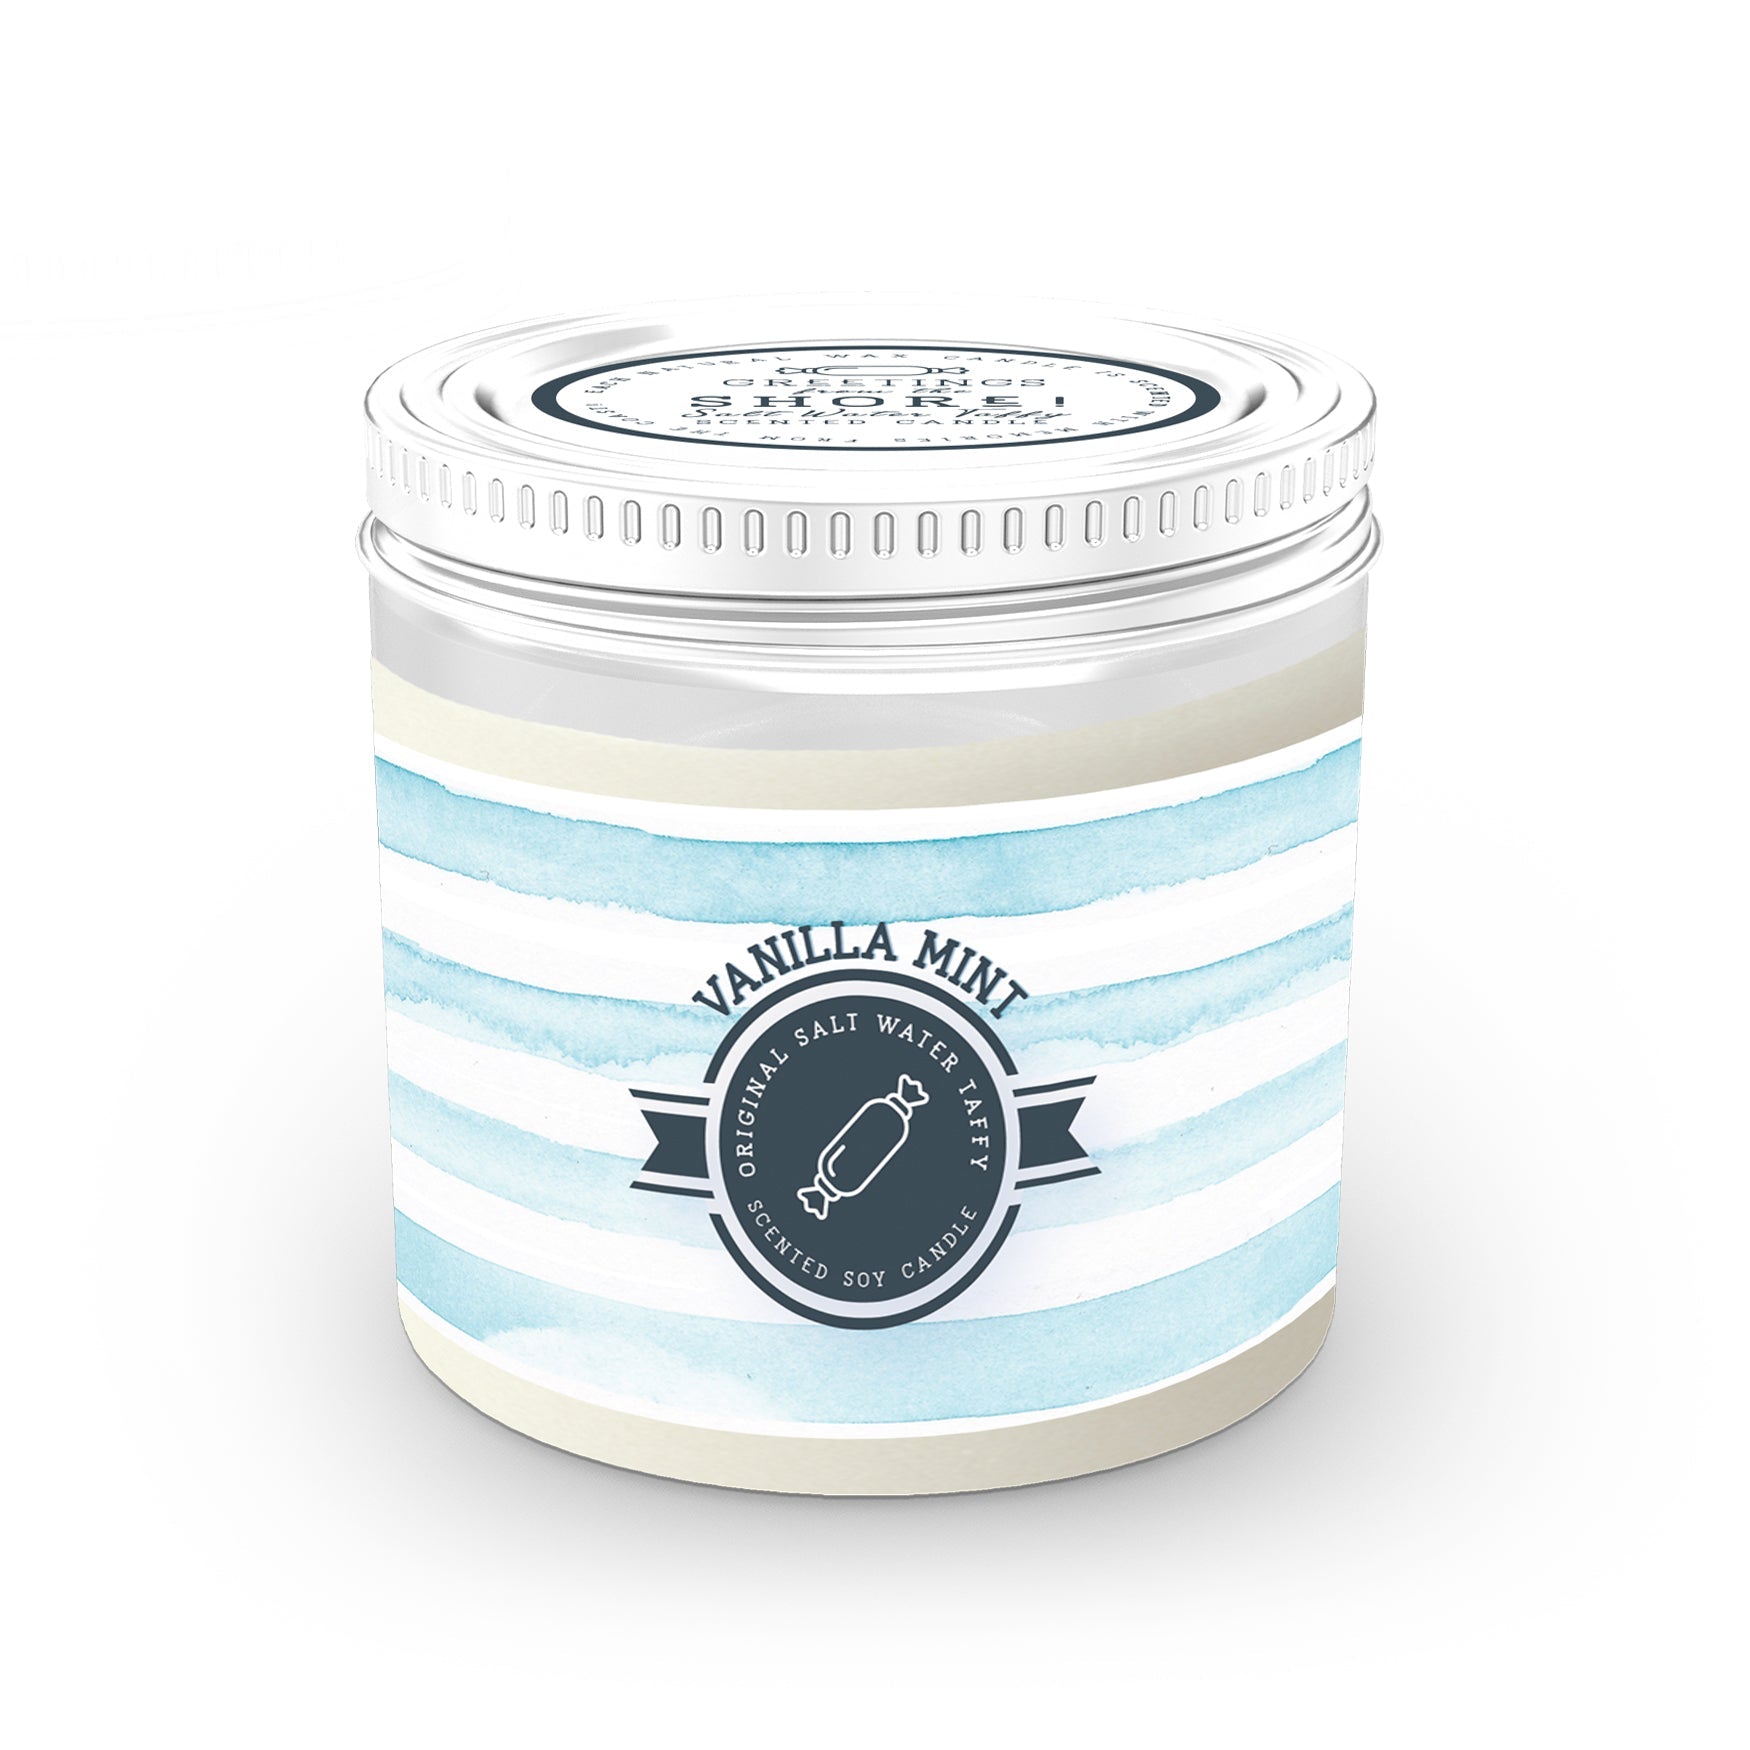 Vanilla Mint 13oz Candle - Salt Water Taffy Collection